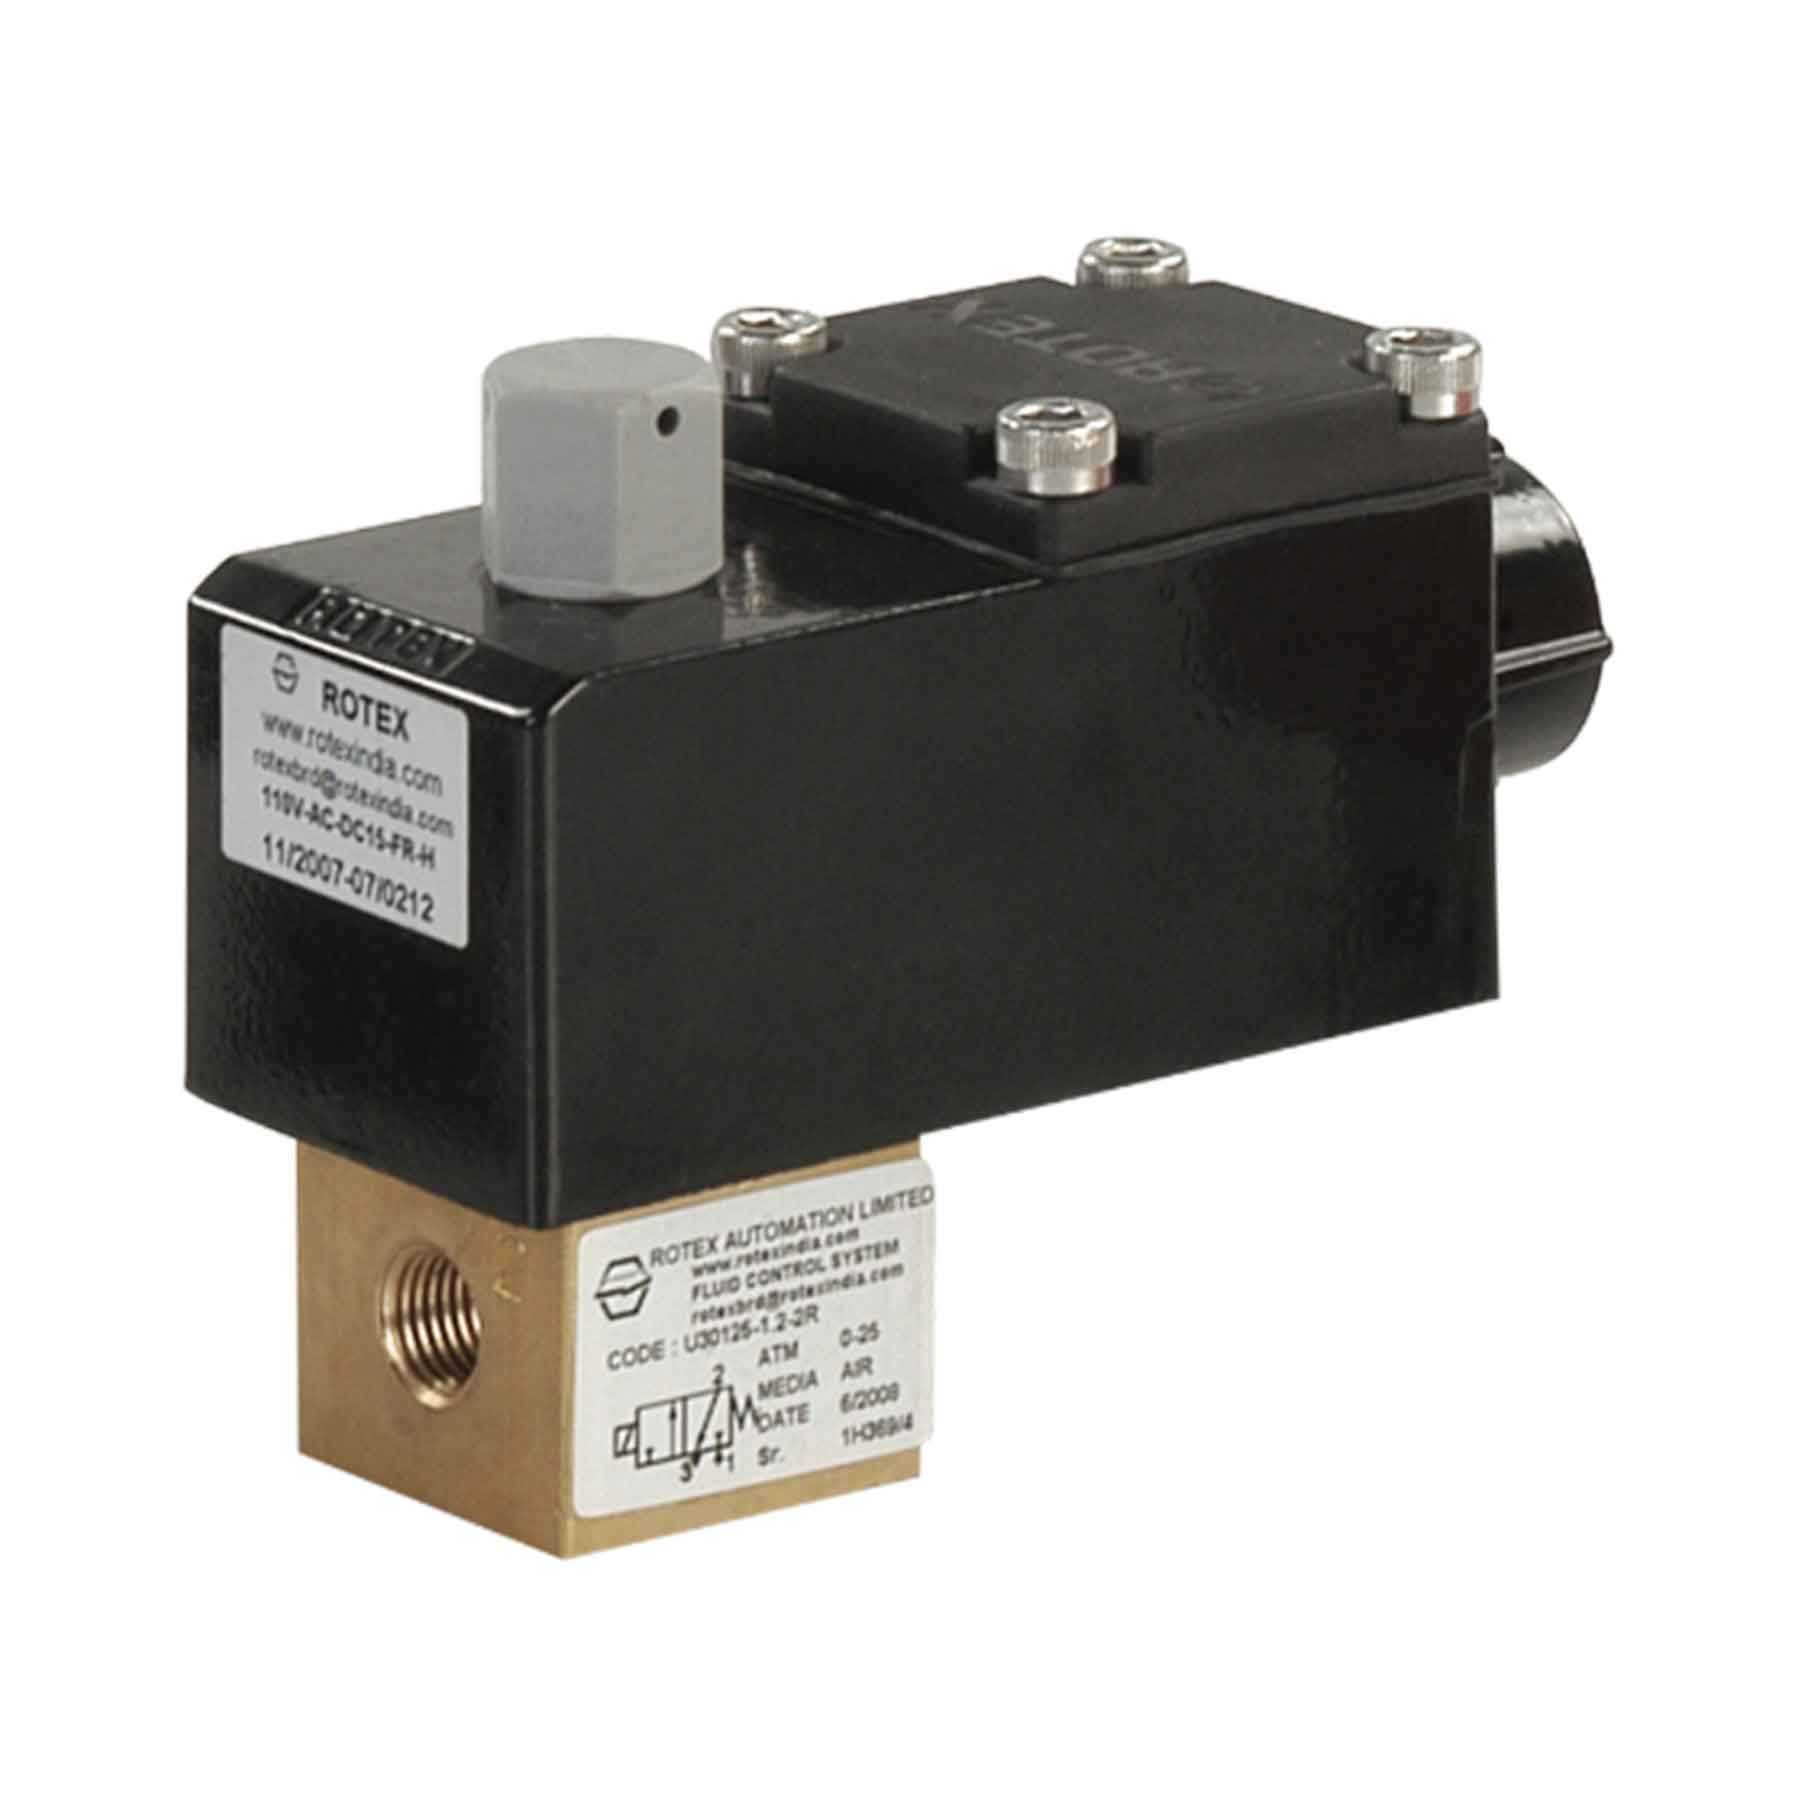 Rotex 2/2-Way Normally Closed Direct Lift Solenoid Valve 20101-2.5-2R-B5-S2+I-24V-DC-39H-01